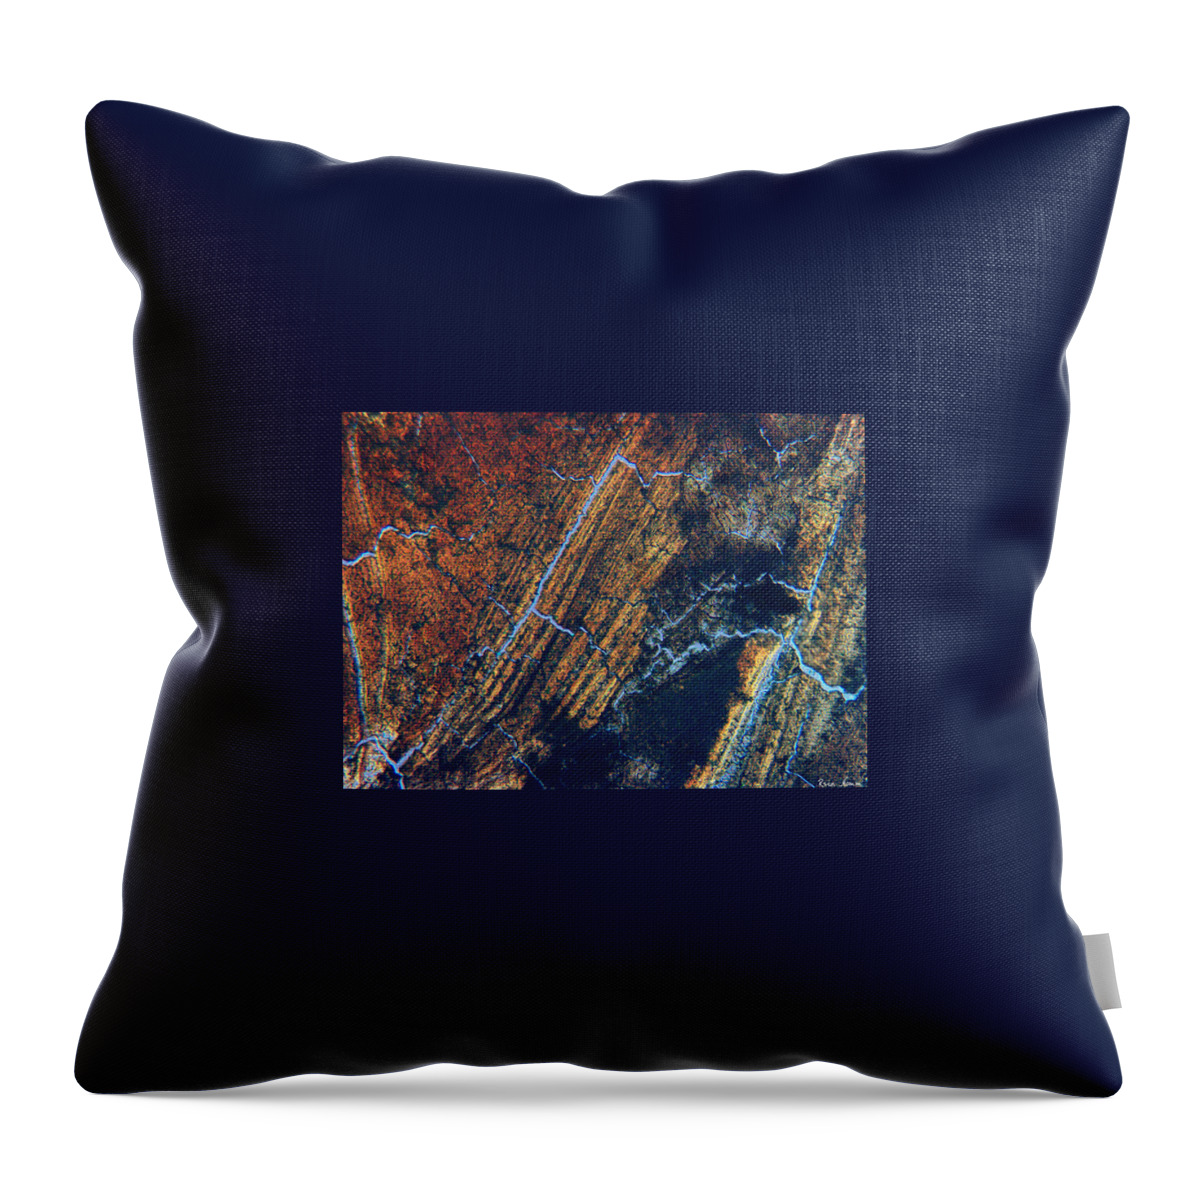  Throw Pillow featuring the photograph Ingrained by Rein Nomm